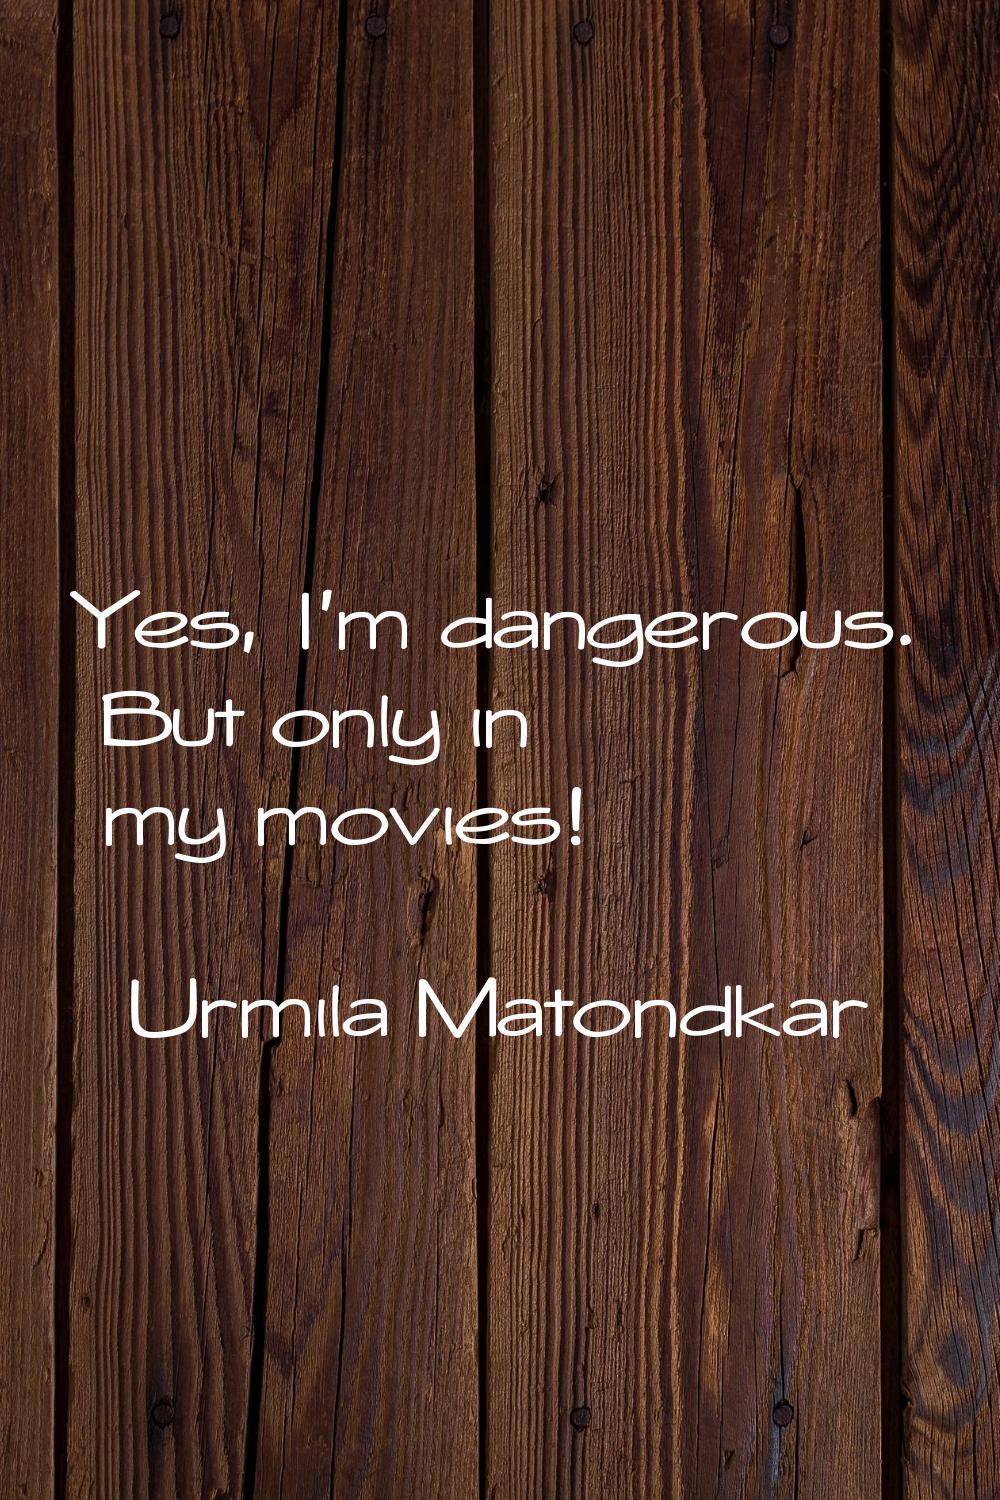 Yes, I'm dangerous. But only in my movies!